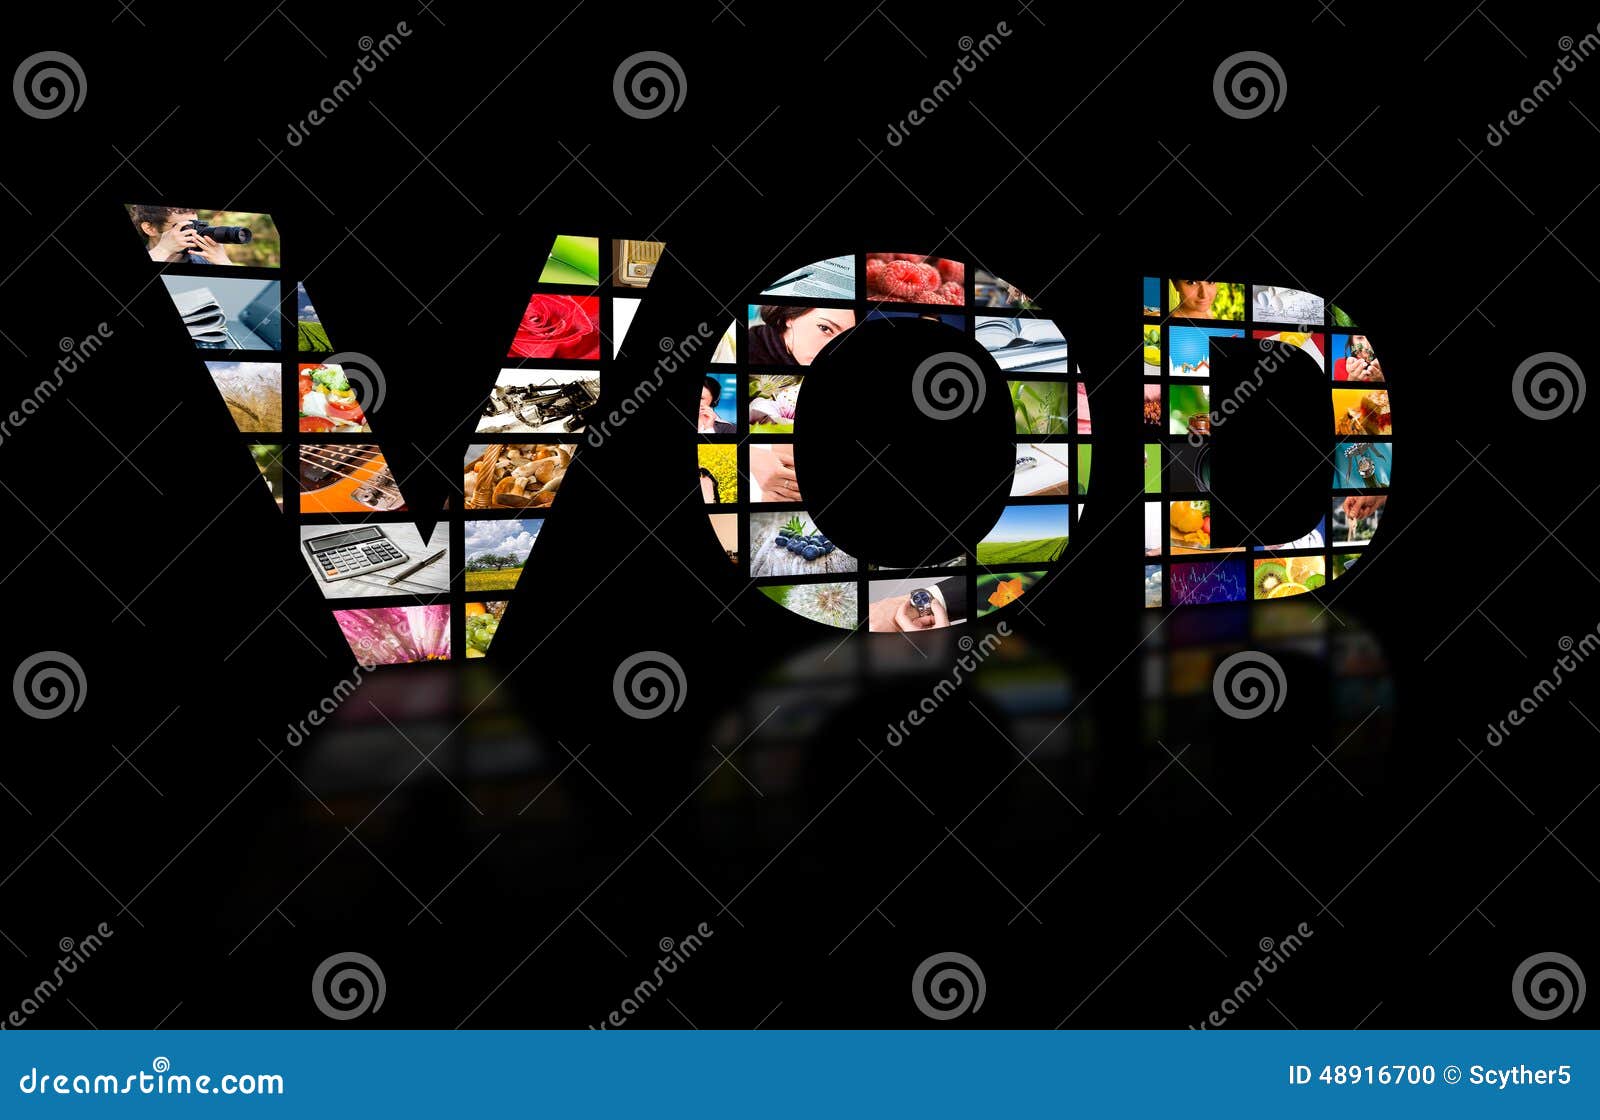 Video on Demand Abstract Text, Tv Concept